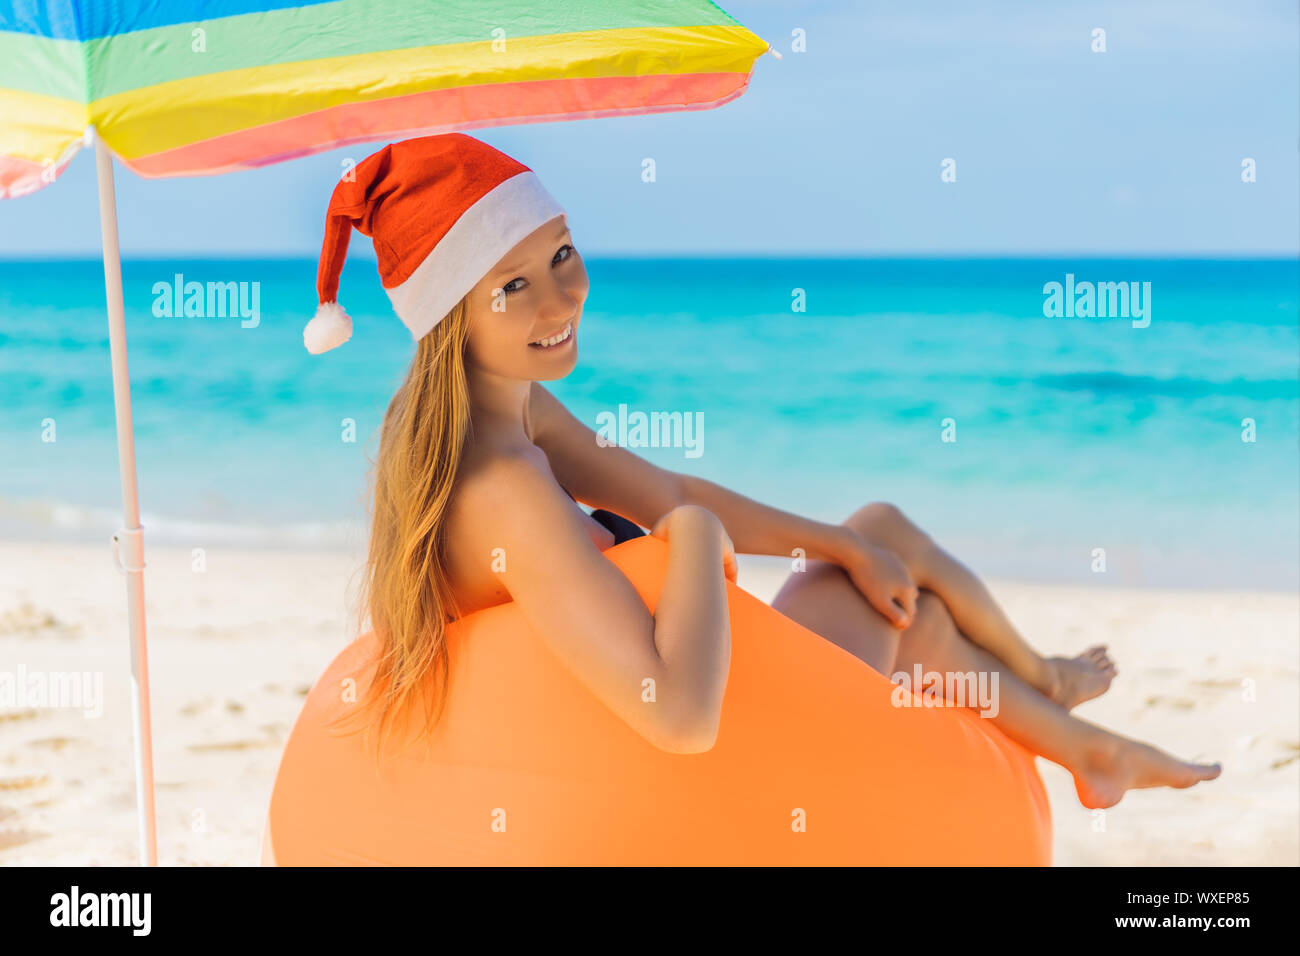 Woman on an inflatable beach couch and Christmas hat on the beach under an umbrella Stock Photo